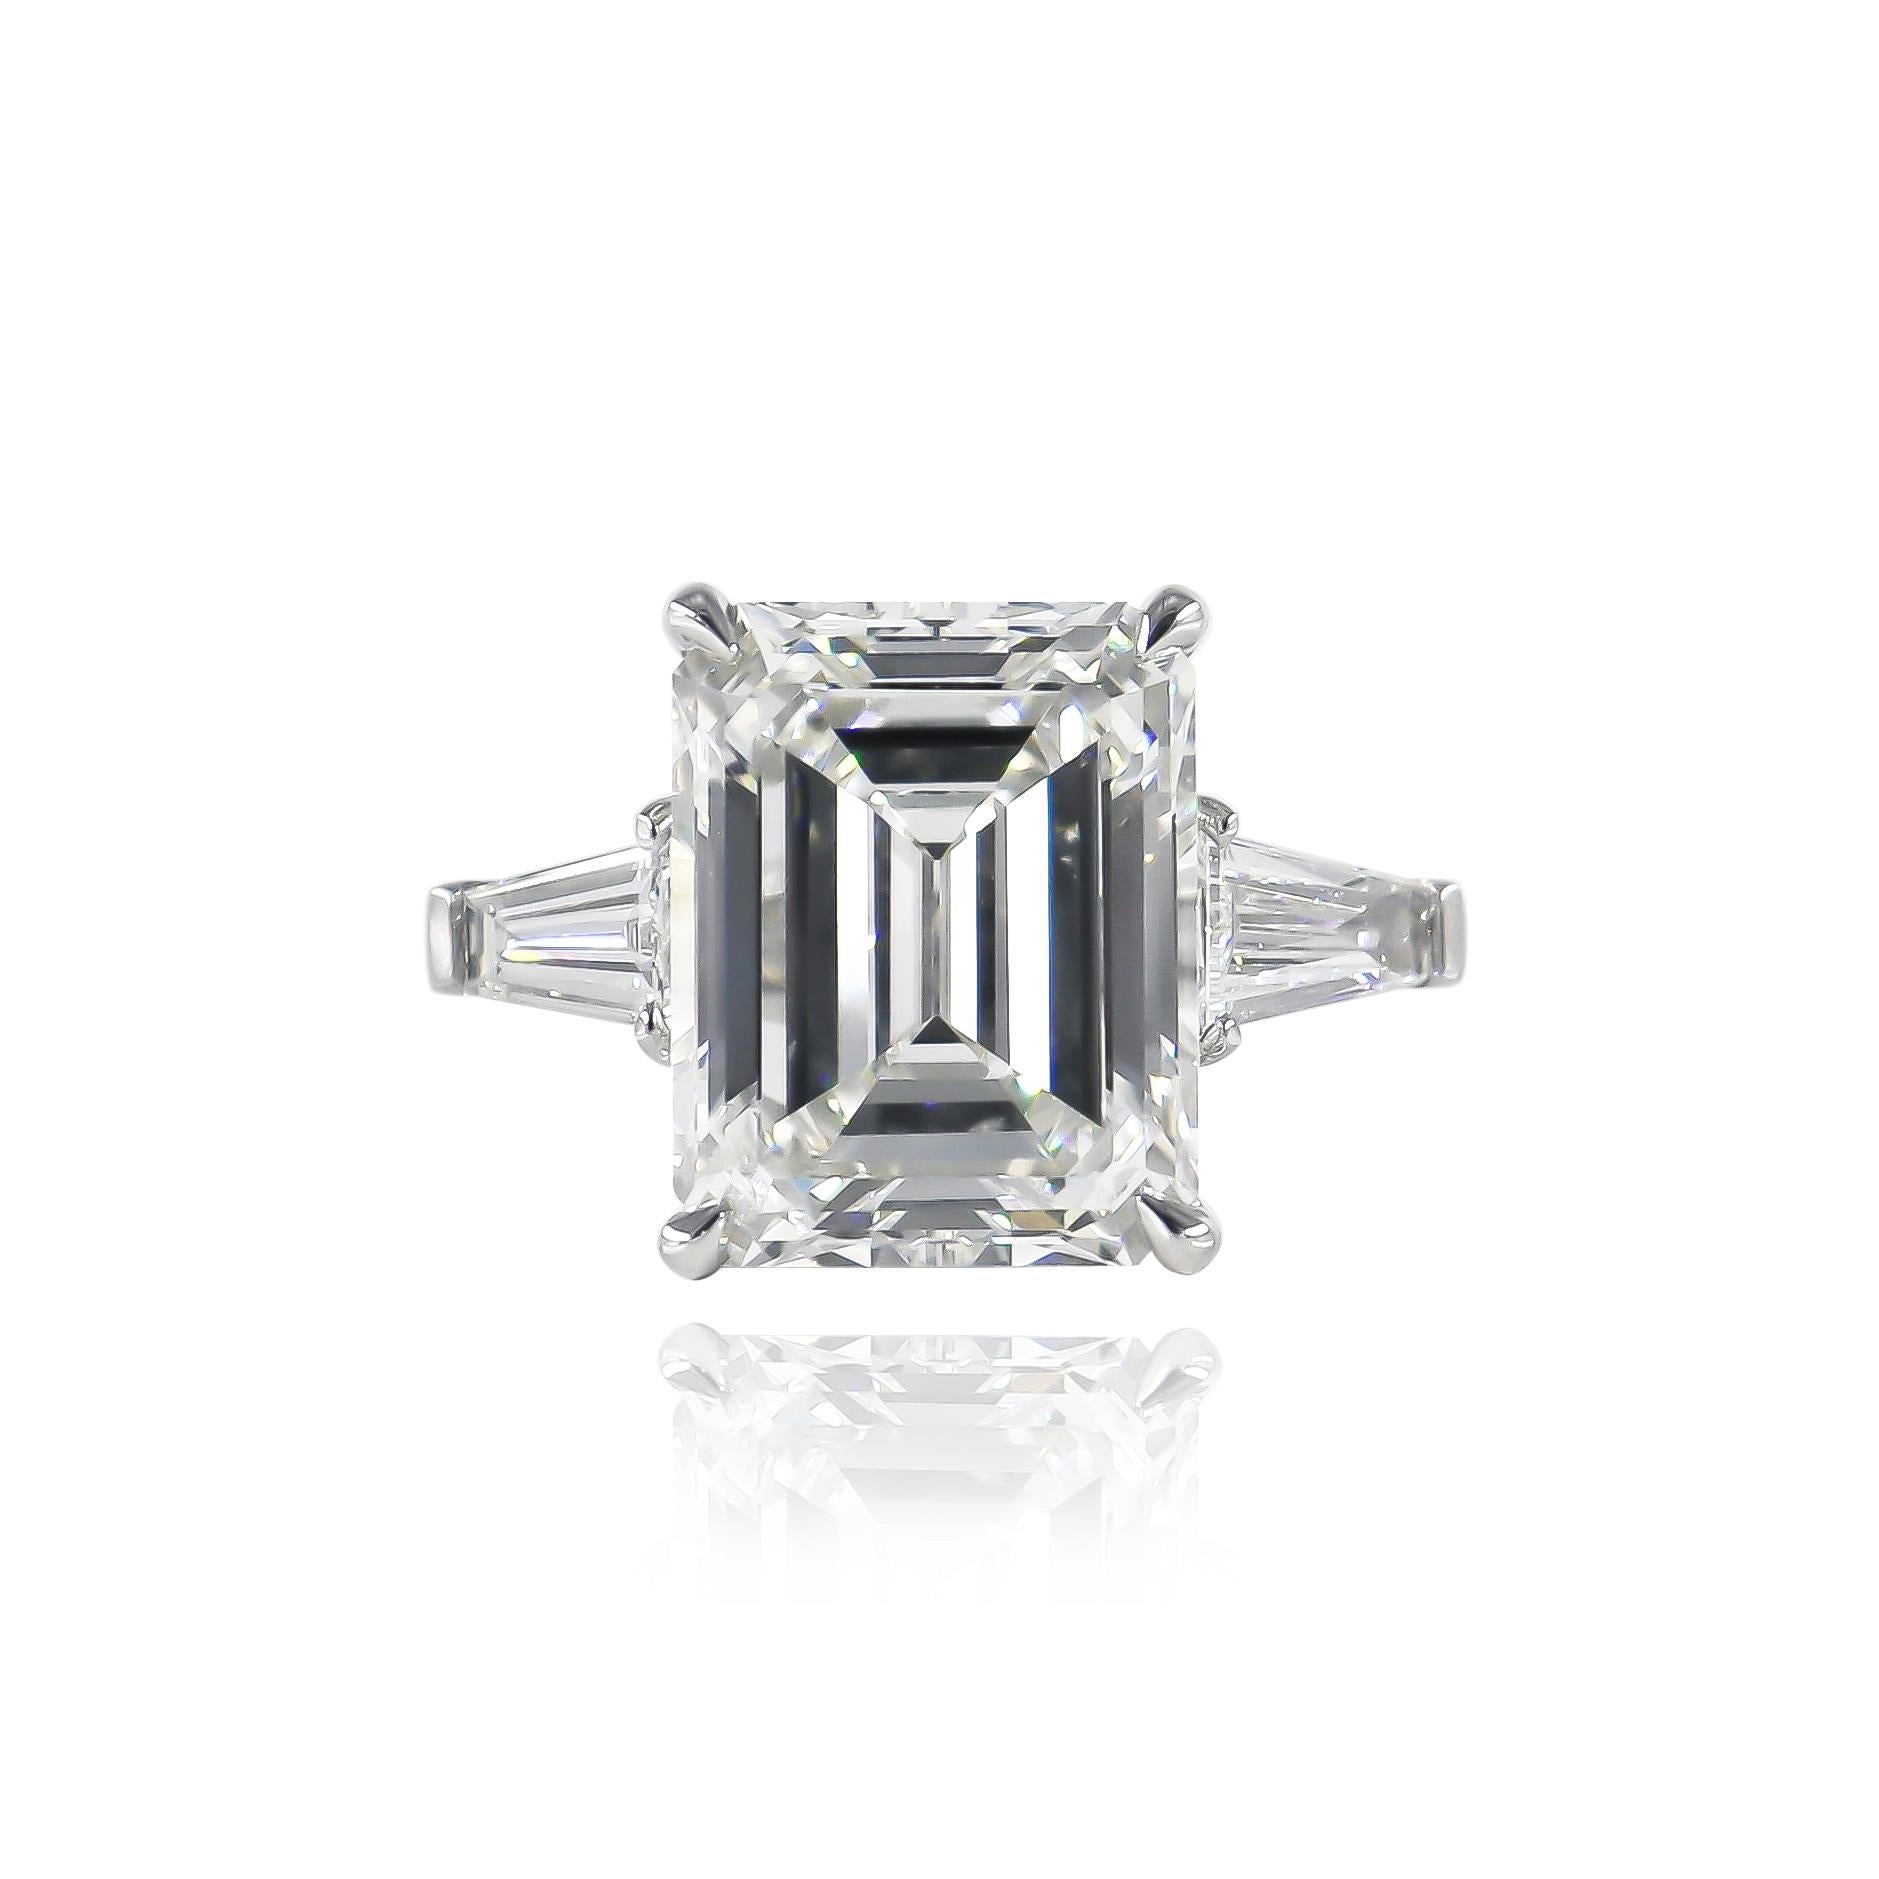 This exceptional, new ring fresh from the J. Birnbach workshop features of beautifully faceted 5.49 carat emerald cut diamond of H color and SI2 clarity as described by GIA grading report #2225076856. The stone is set in a platinum, three-stone ring